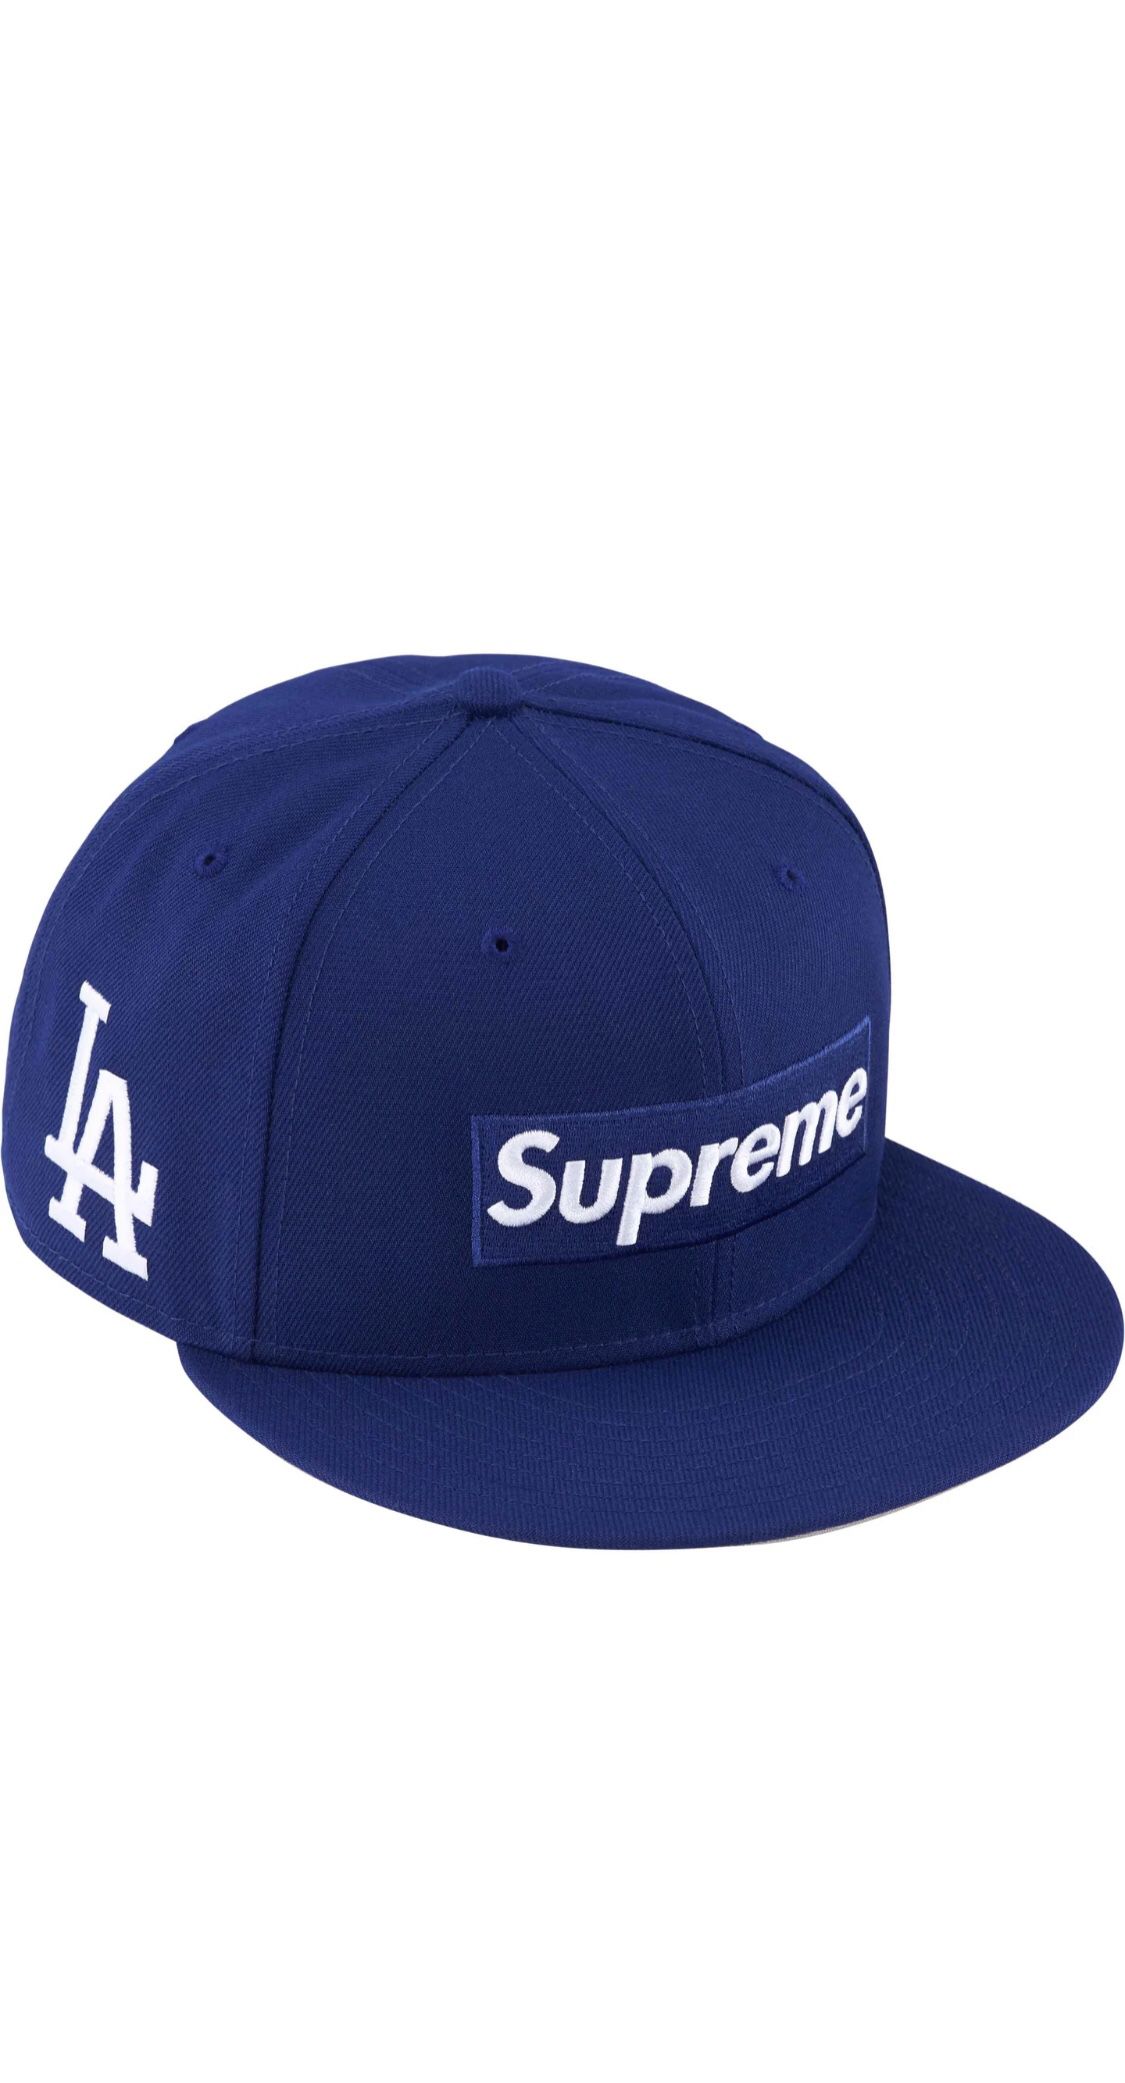 SUPREME MLB LOS ANGELES FITTED HAT 7 3/8